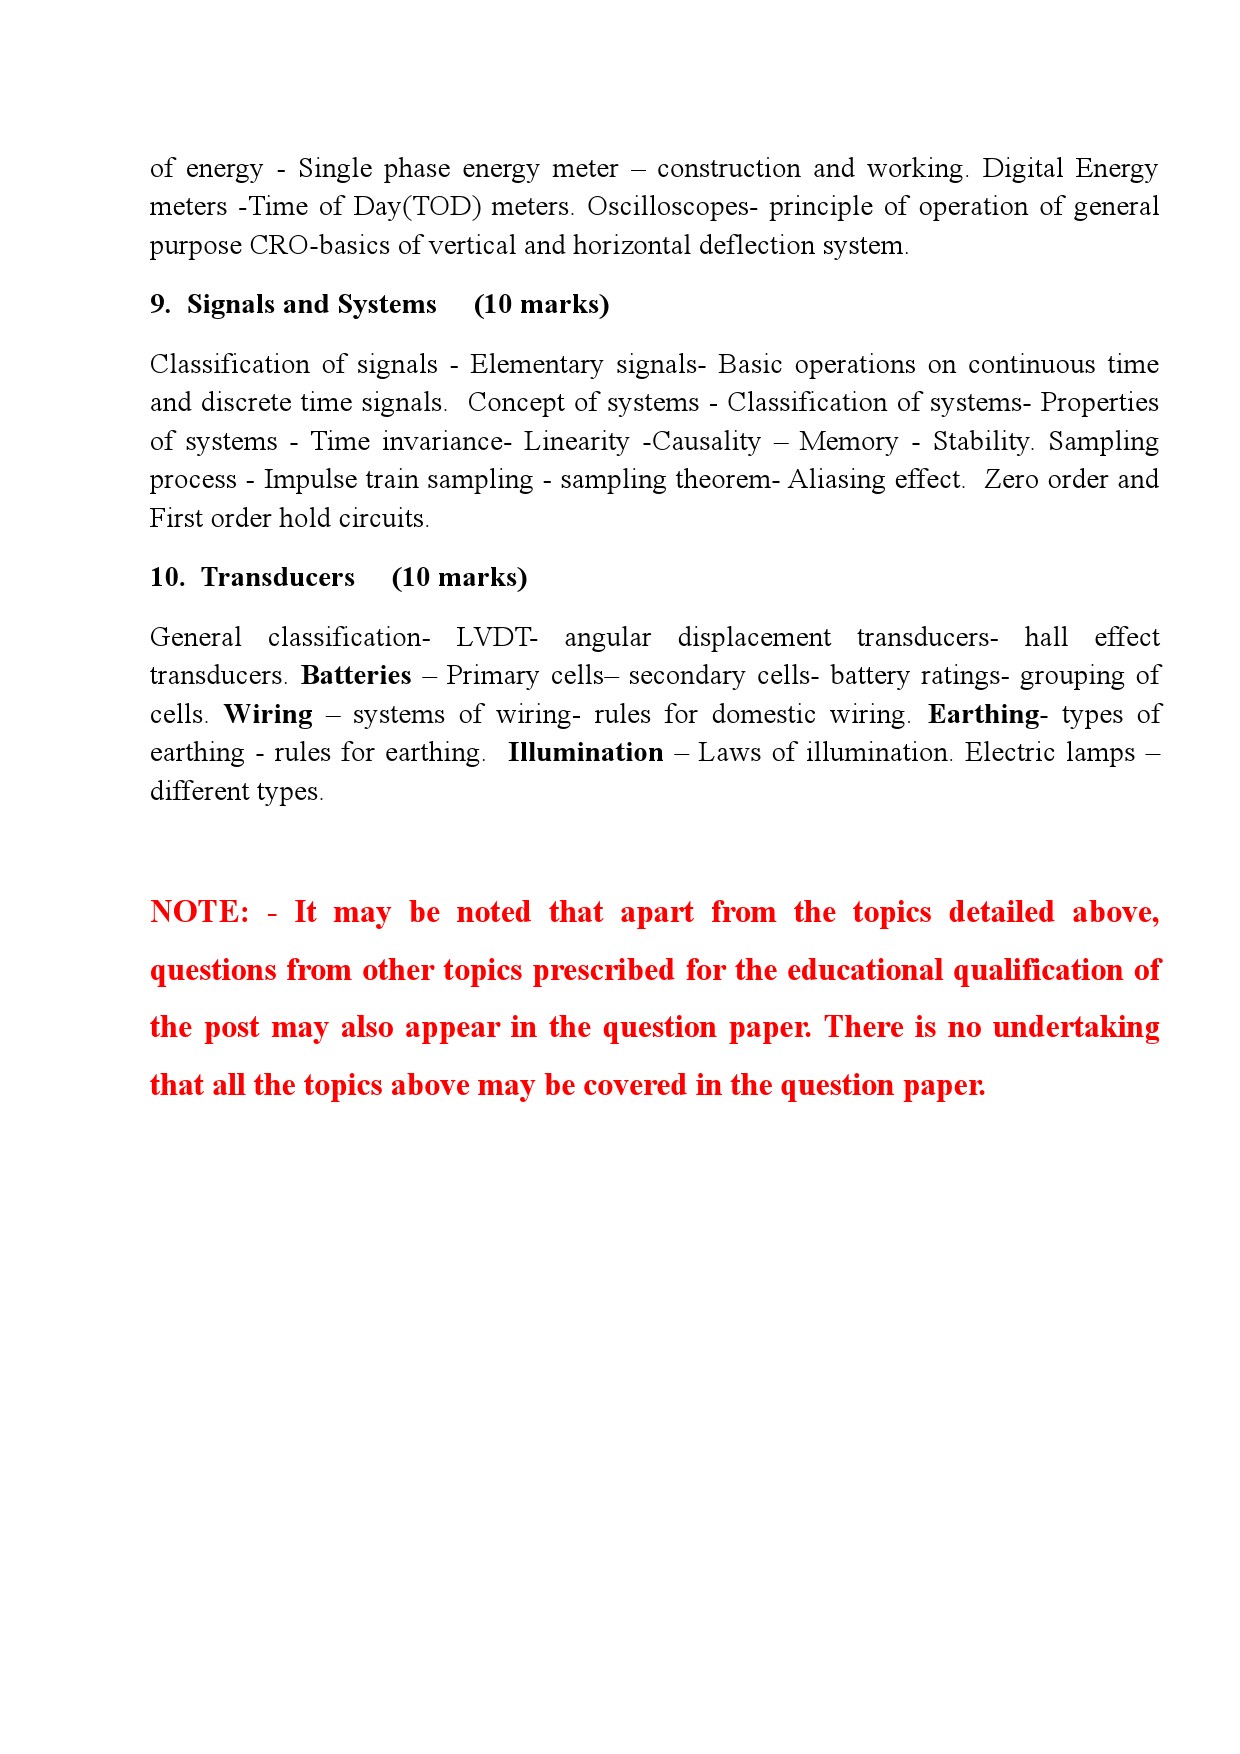 SYLLABUS FOR THE POST OF ASSISTANT MANAGER ELECTRICAL - Notification Image 3